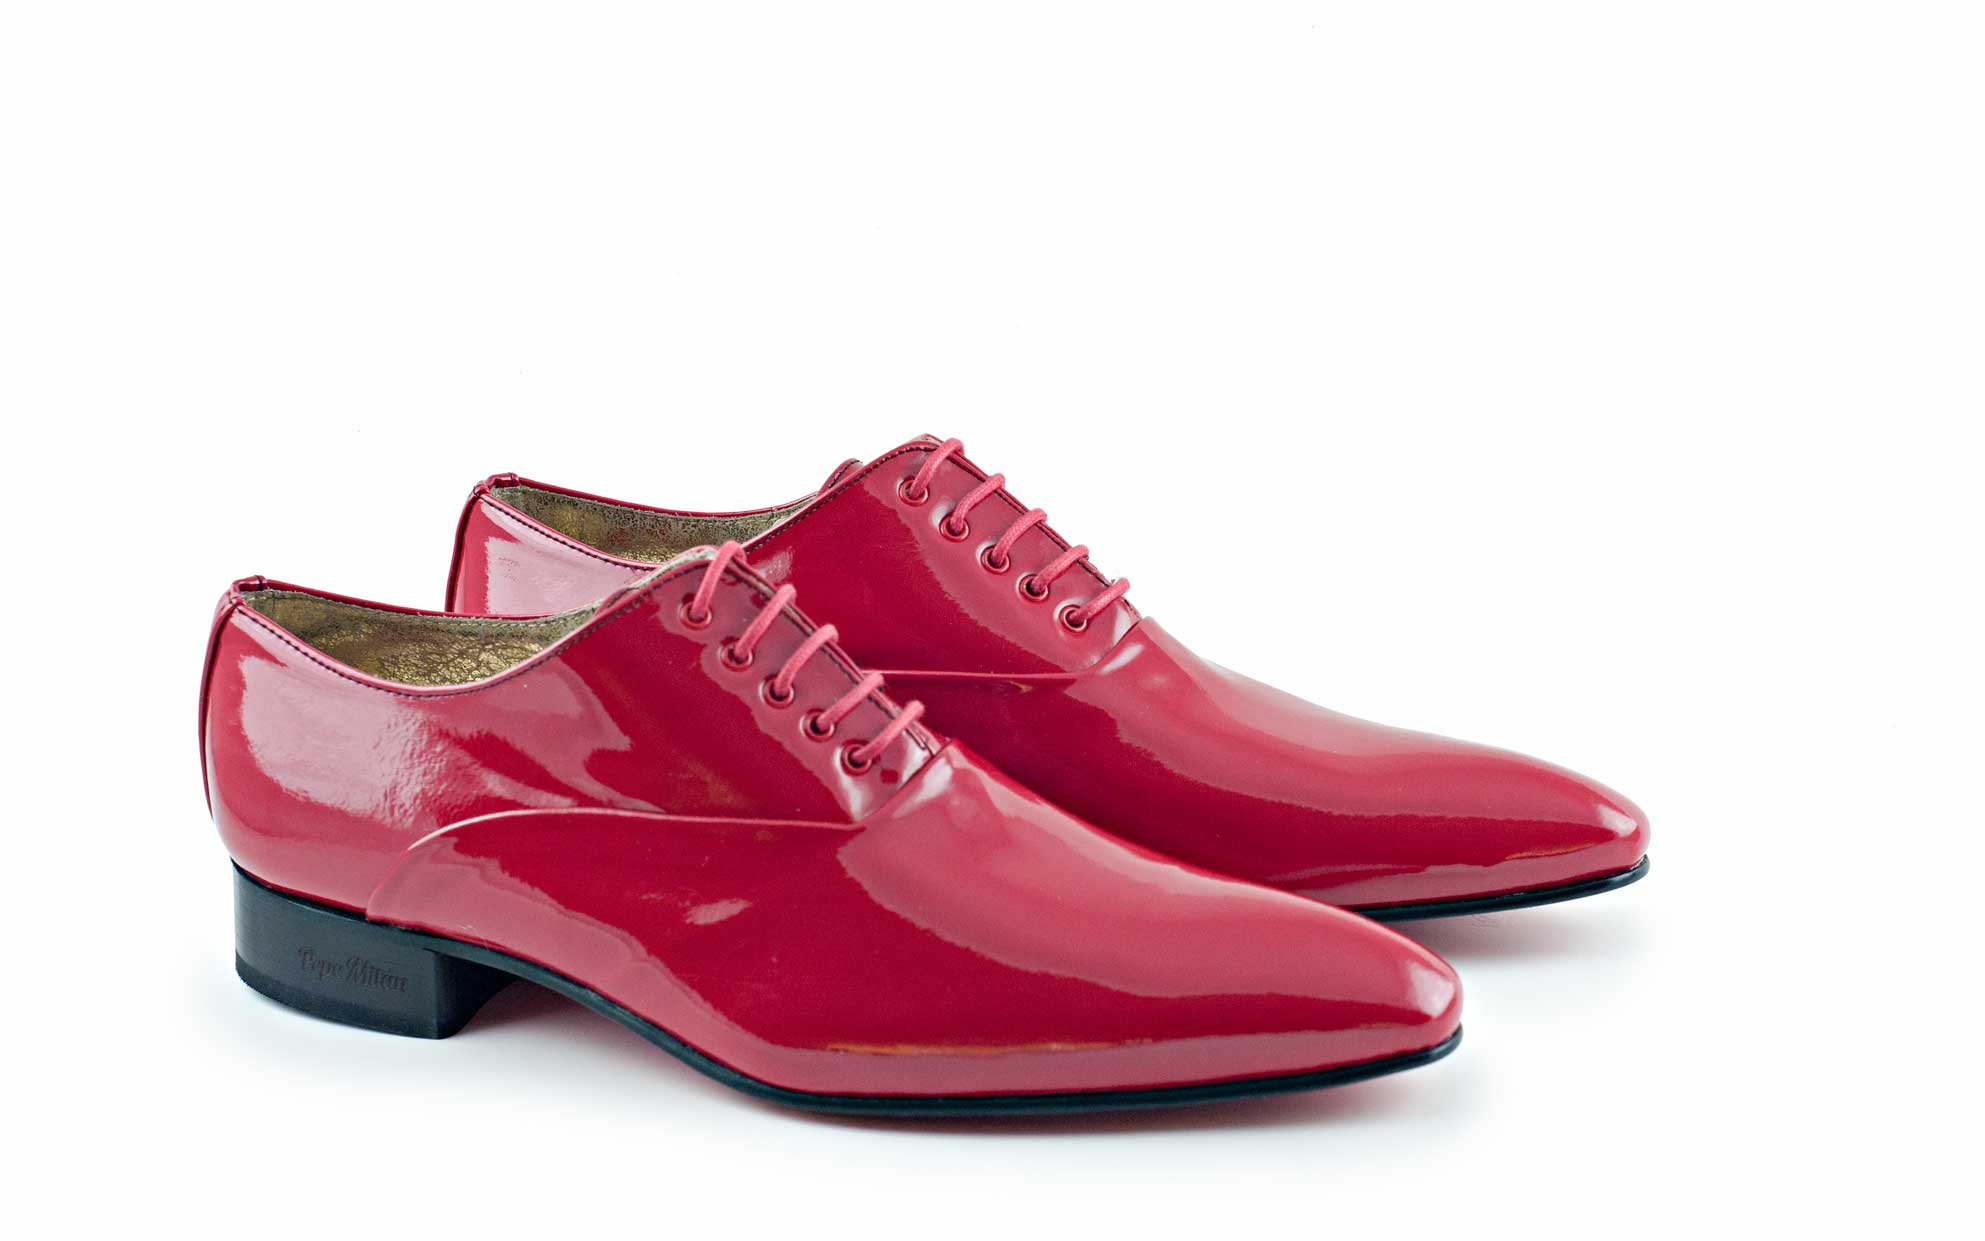 red patent leather shoes